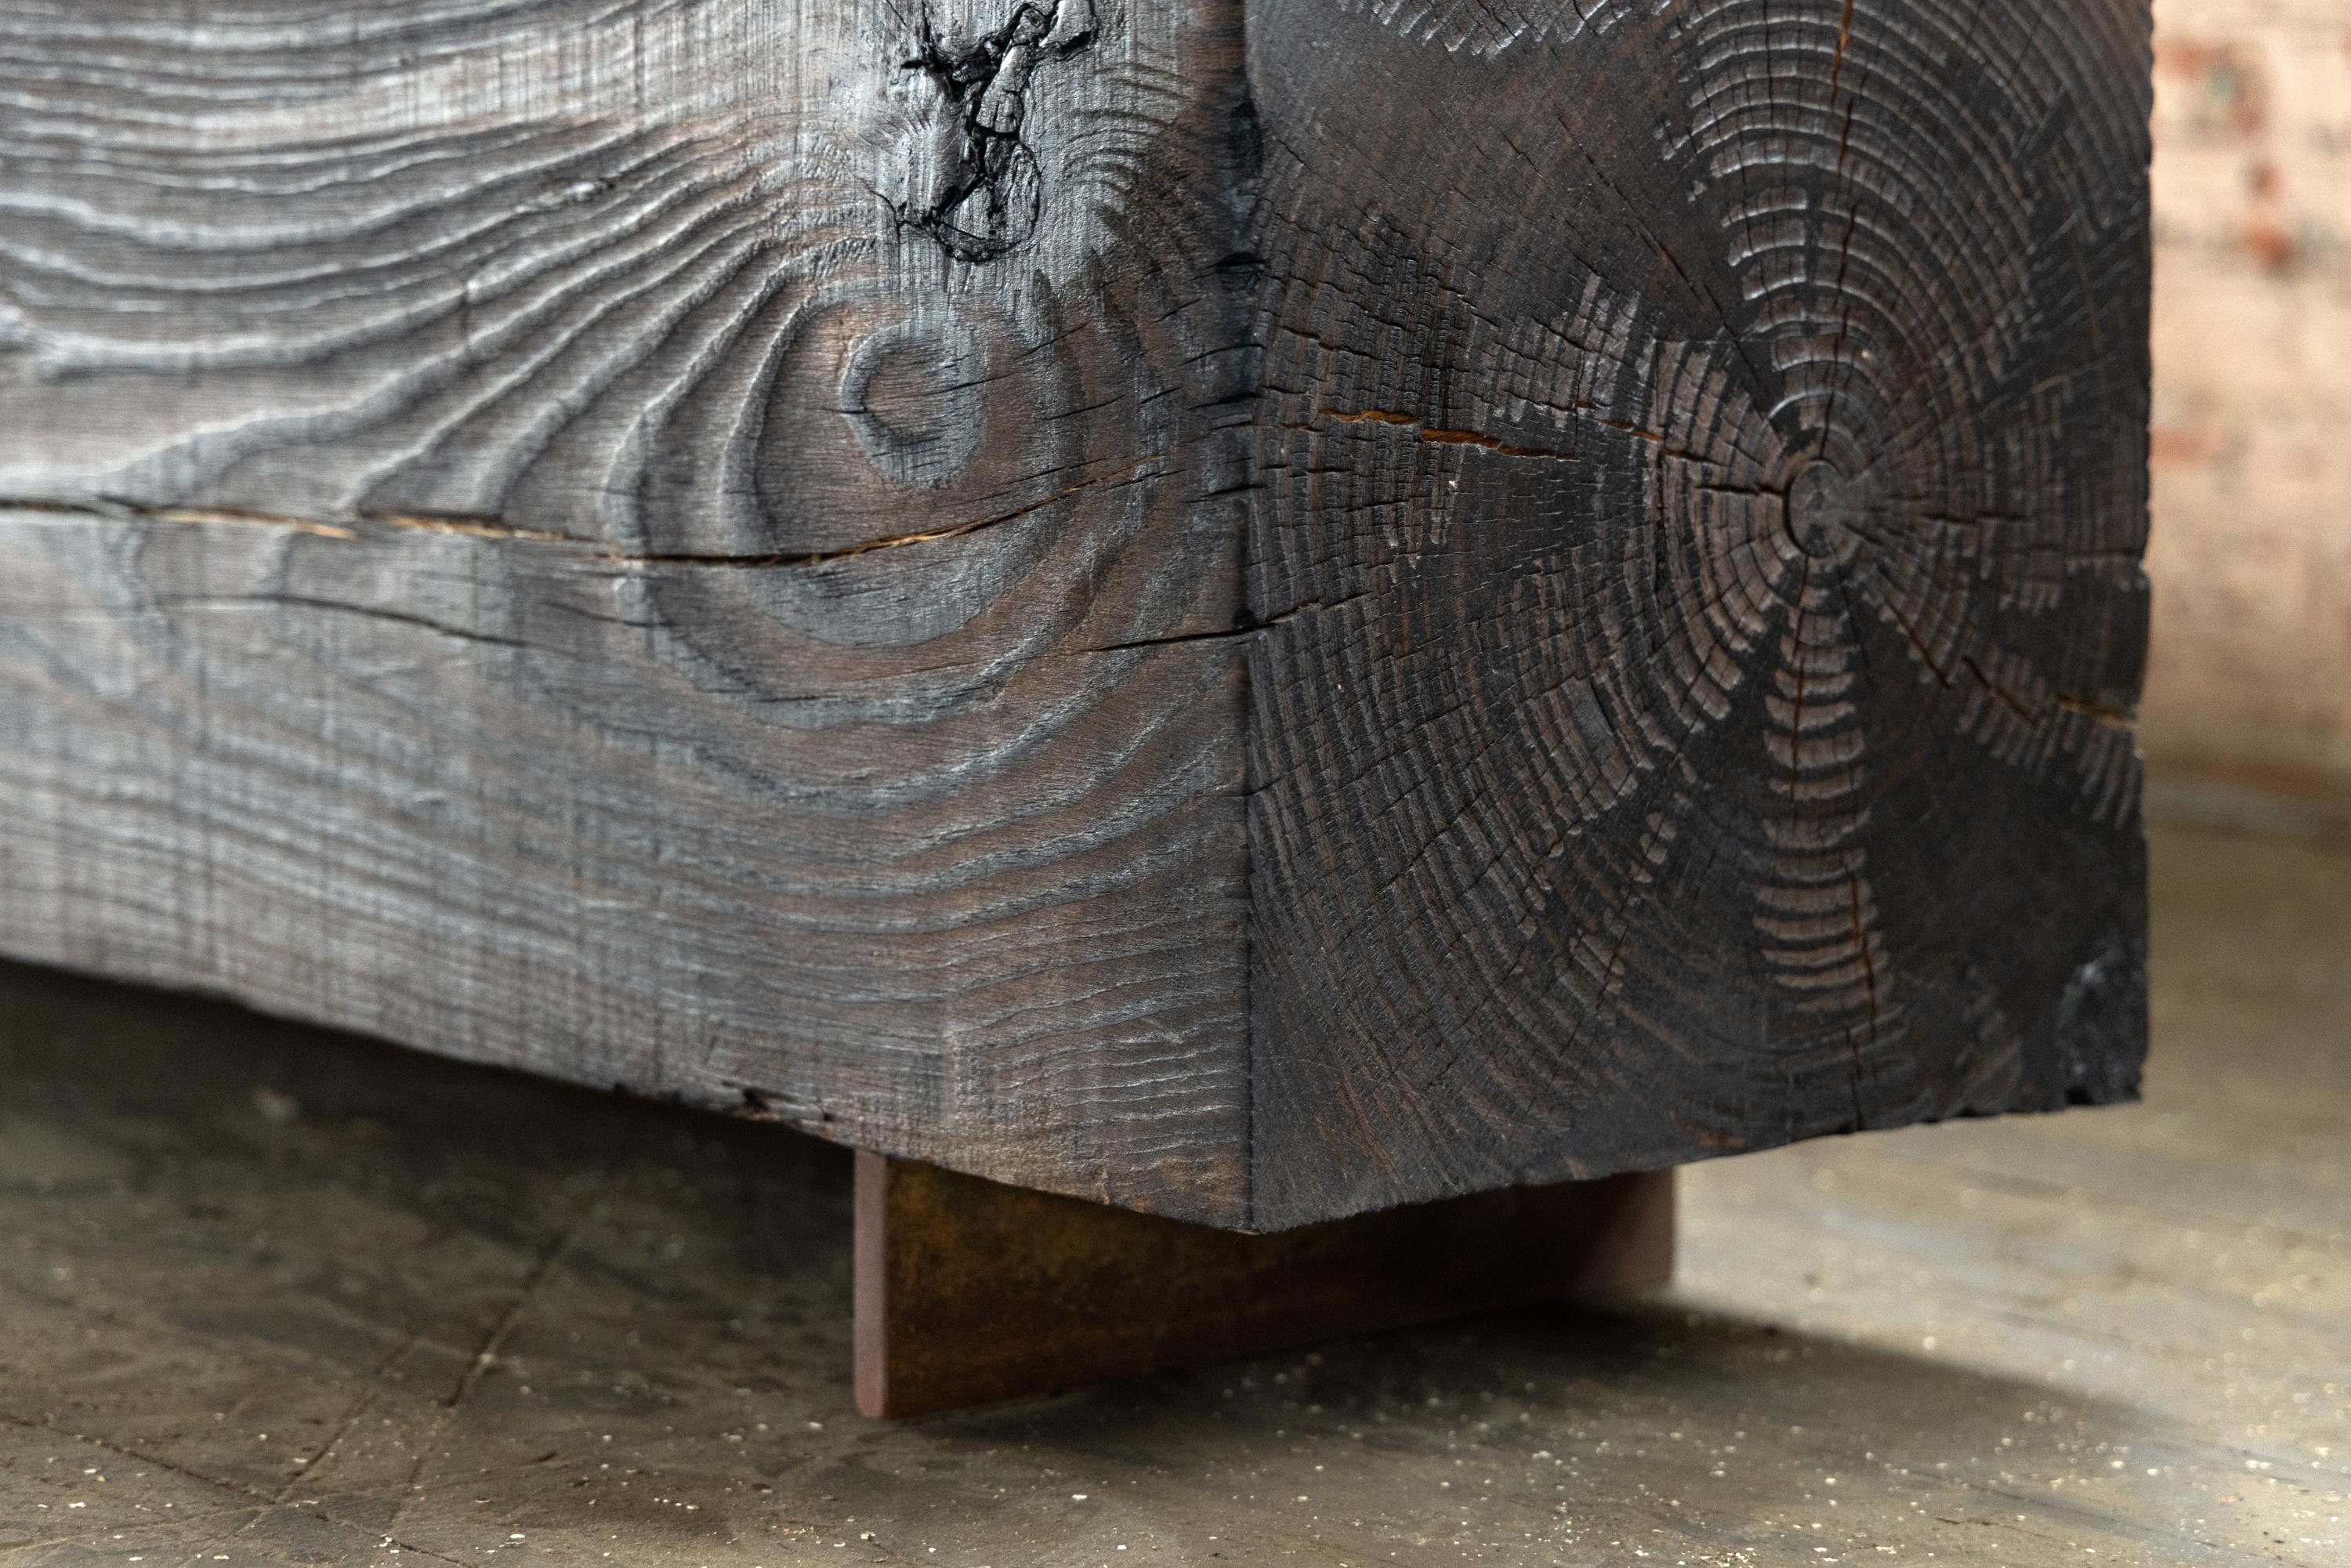 Our beam bench utilizes salvaged local pine logs for a rustic bench for indoors or outdoors. Narrow and backless, the simple lines express the natural texture of the end grain of each species. The 15